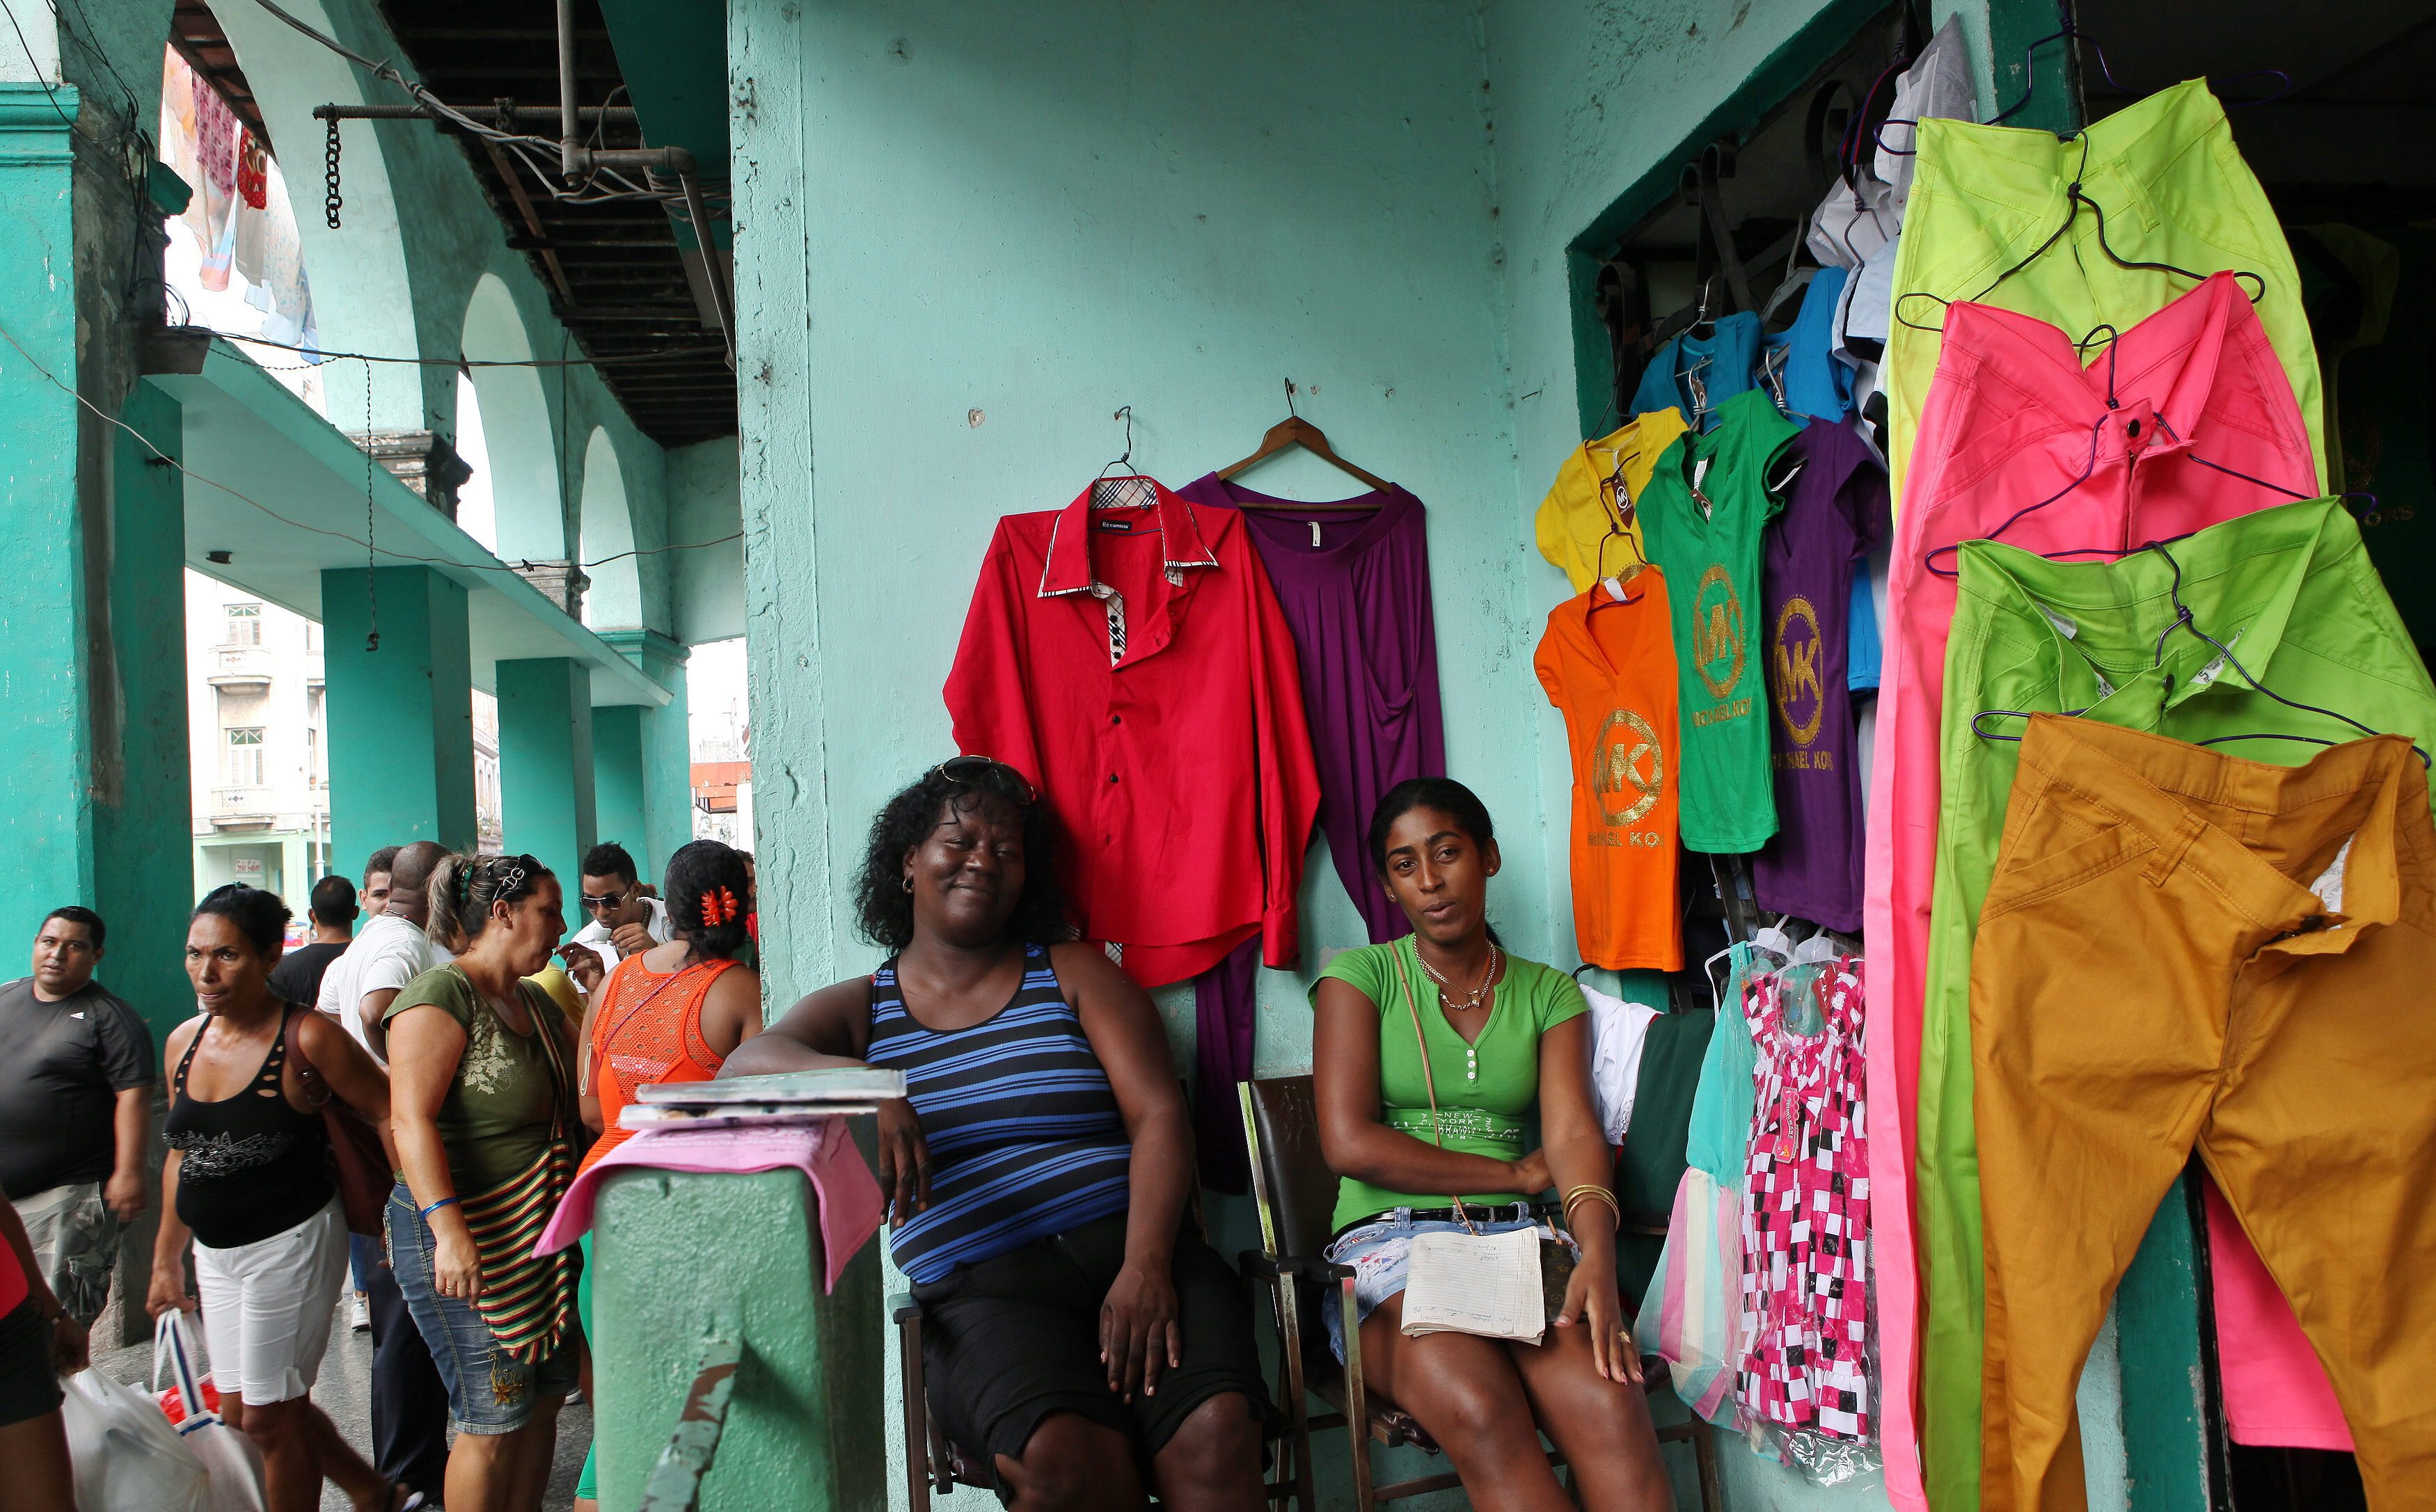 CUBAN BUSINESSES. Two business owners wait for clients at their imported clothing shop in Havana, Cuba, December 30, 2013. File photo by Alejandro Ernesto/EPA 